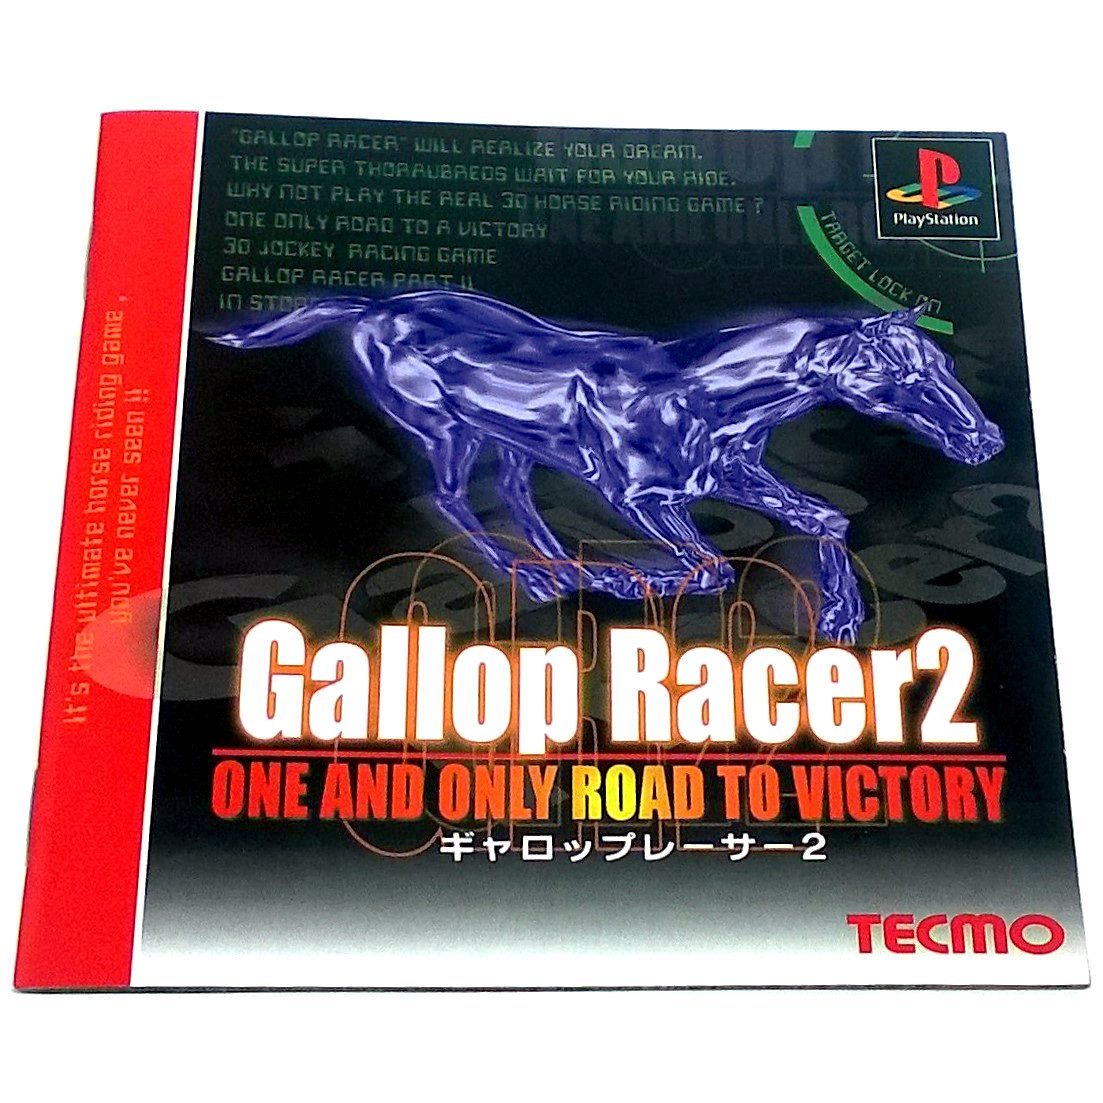 Gallop Racer 2: One and Only Road to Victory for PlayStation (Import) - Front of manual